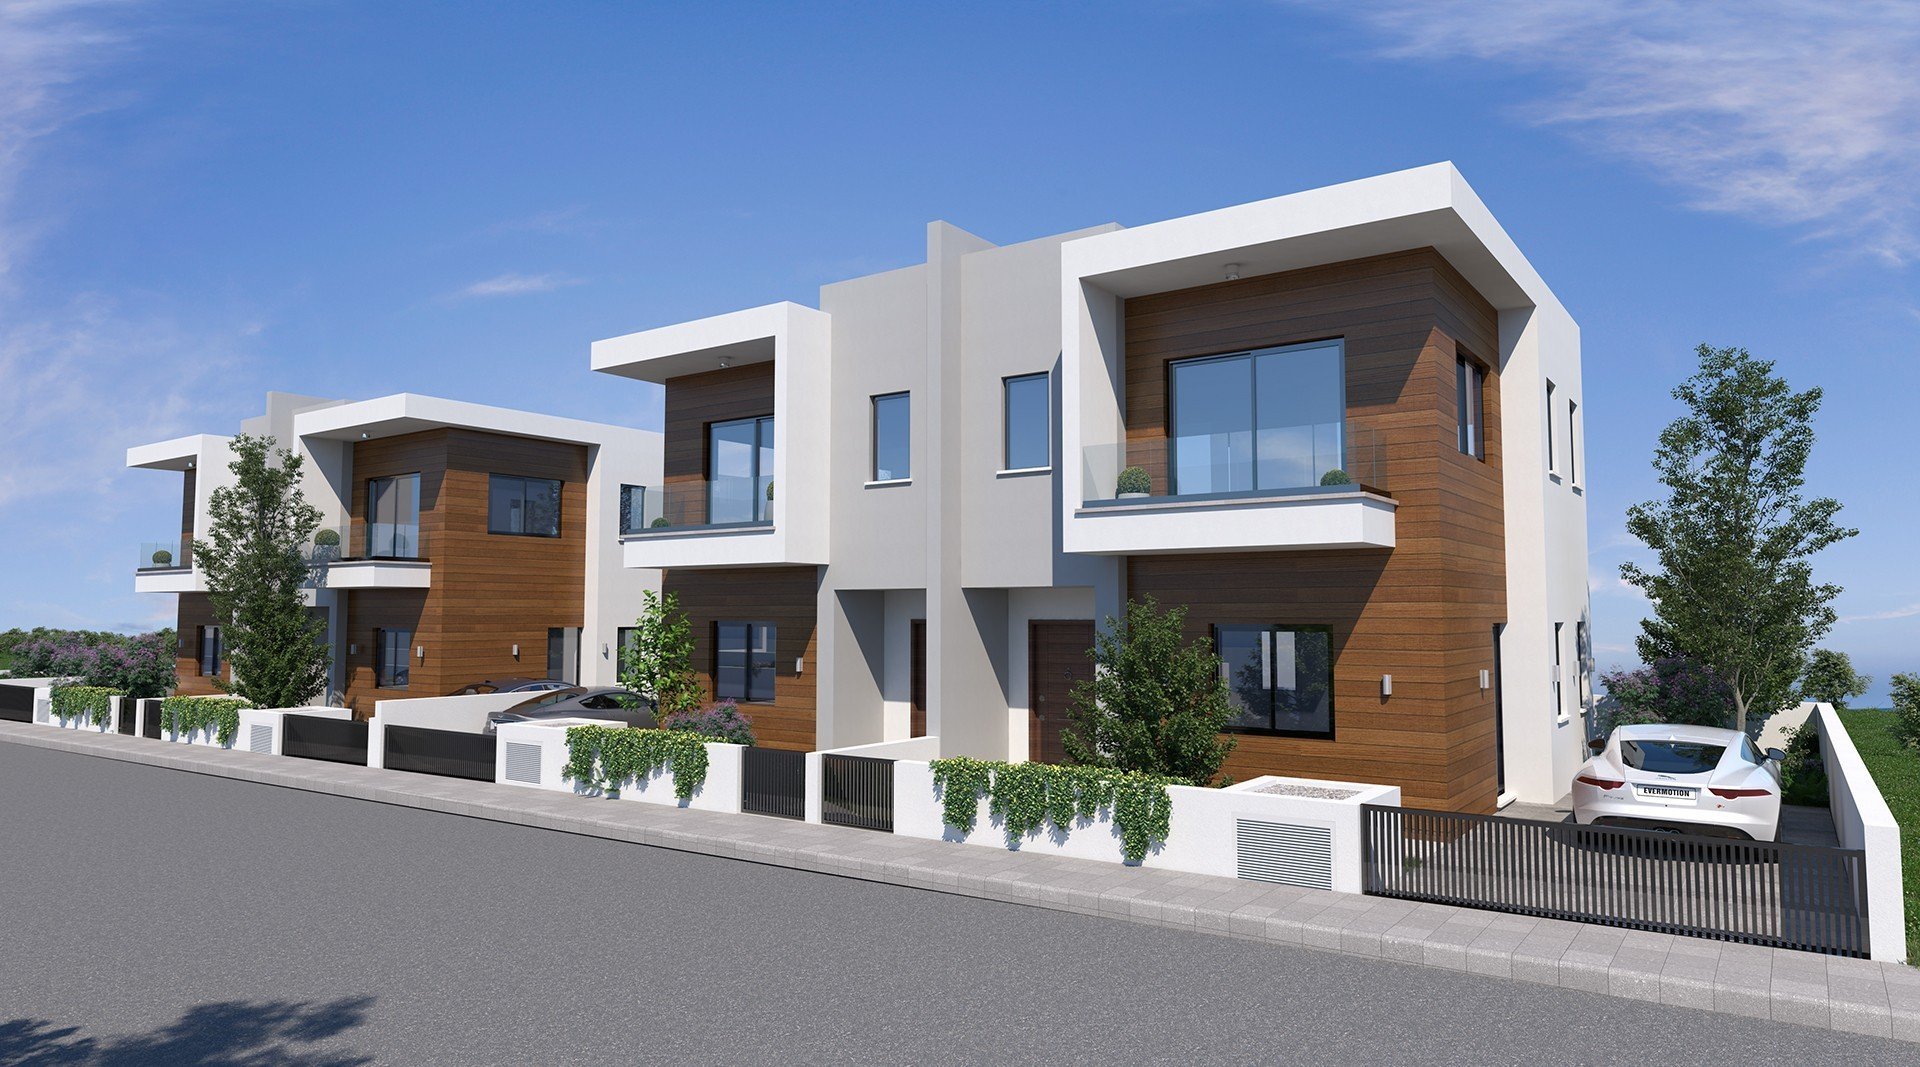 2 Bedroom House for Sale in Potamos Germasogeias, Limassol District